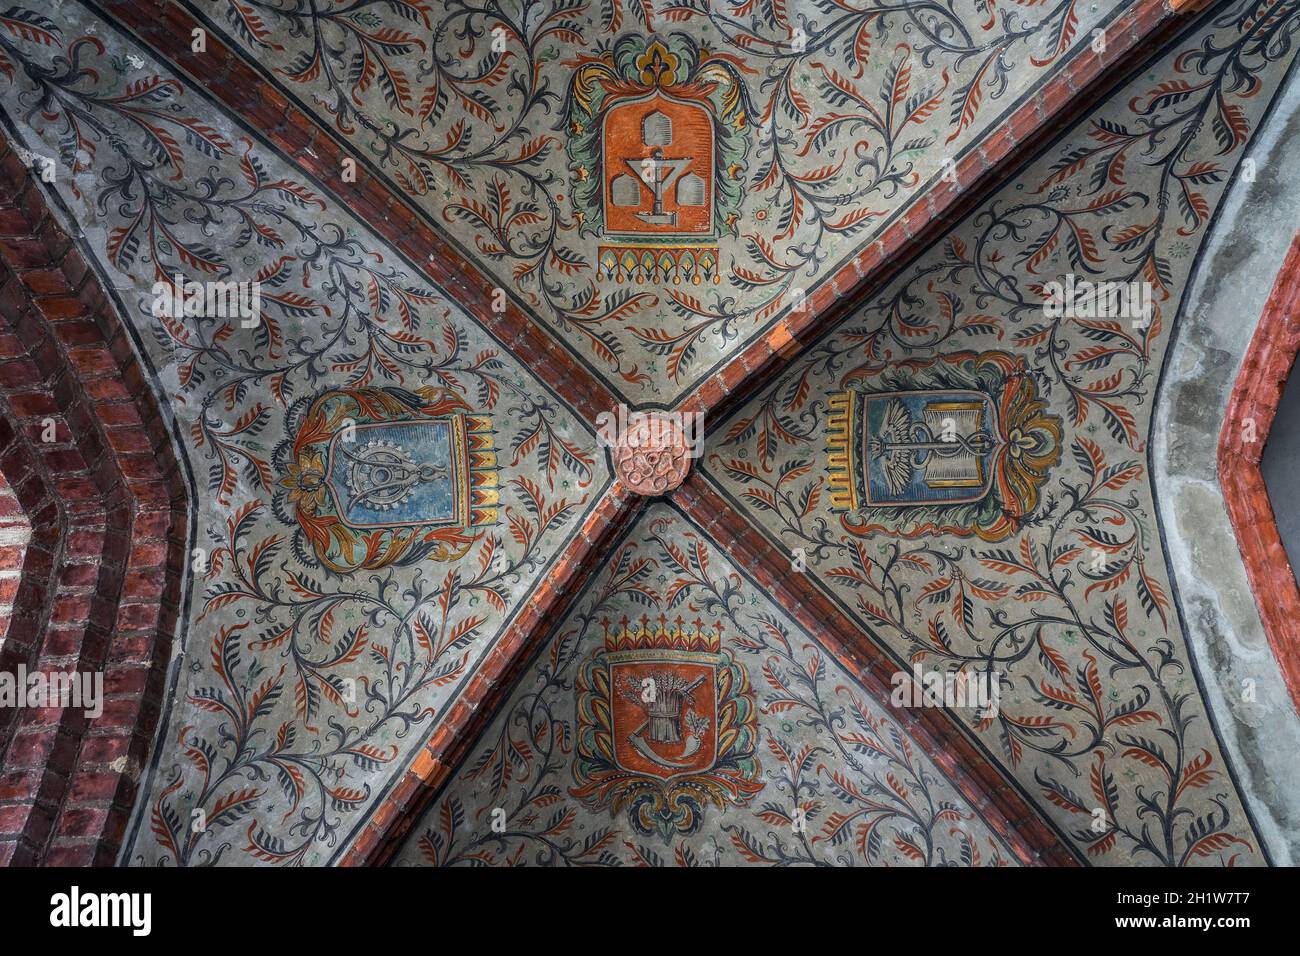 JUETERBOG, GERMANY - MAY 23, 2021: Beautiful ceiling with the coats of arms of the various symbols in the town hall building. Stock Photo